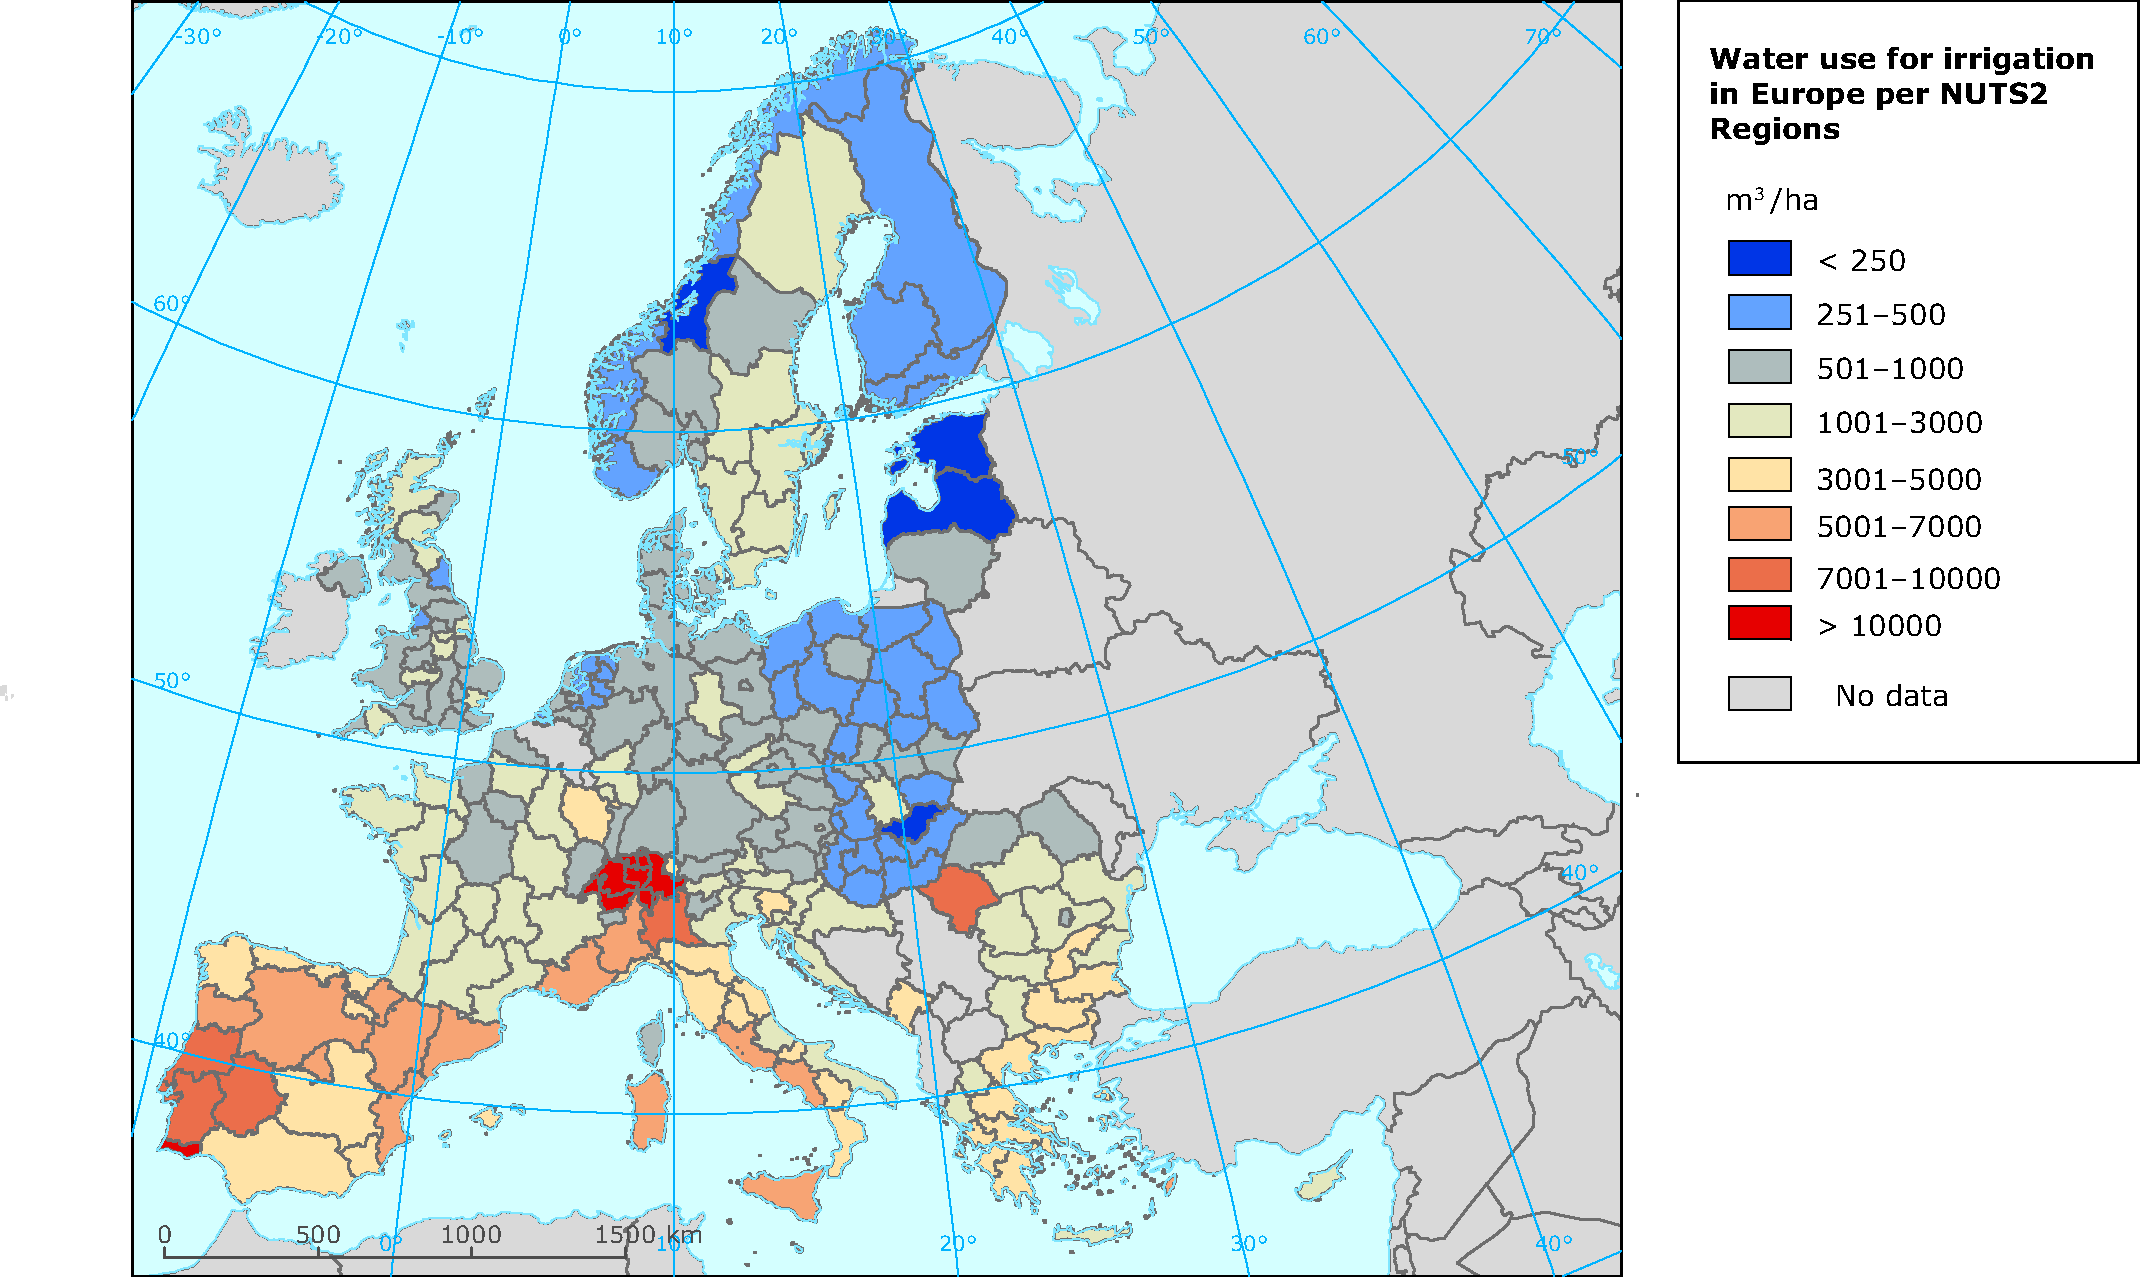 Water Used for Irrigation in Europe per NUTS2 Regions (m3/ha)